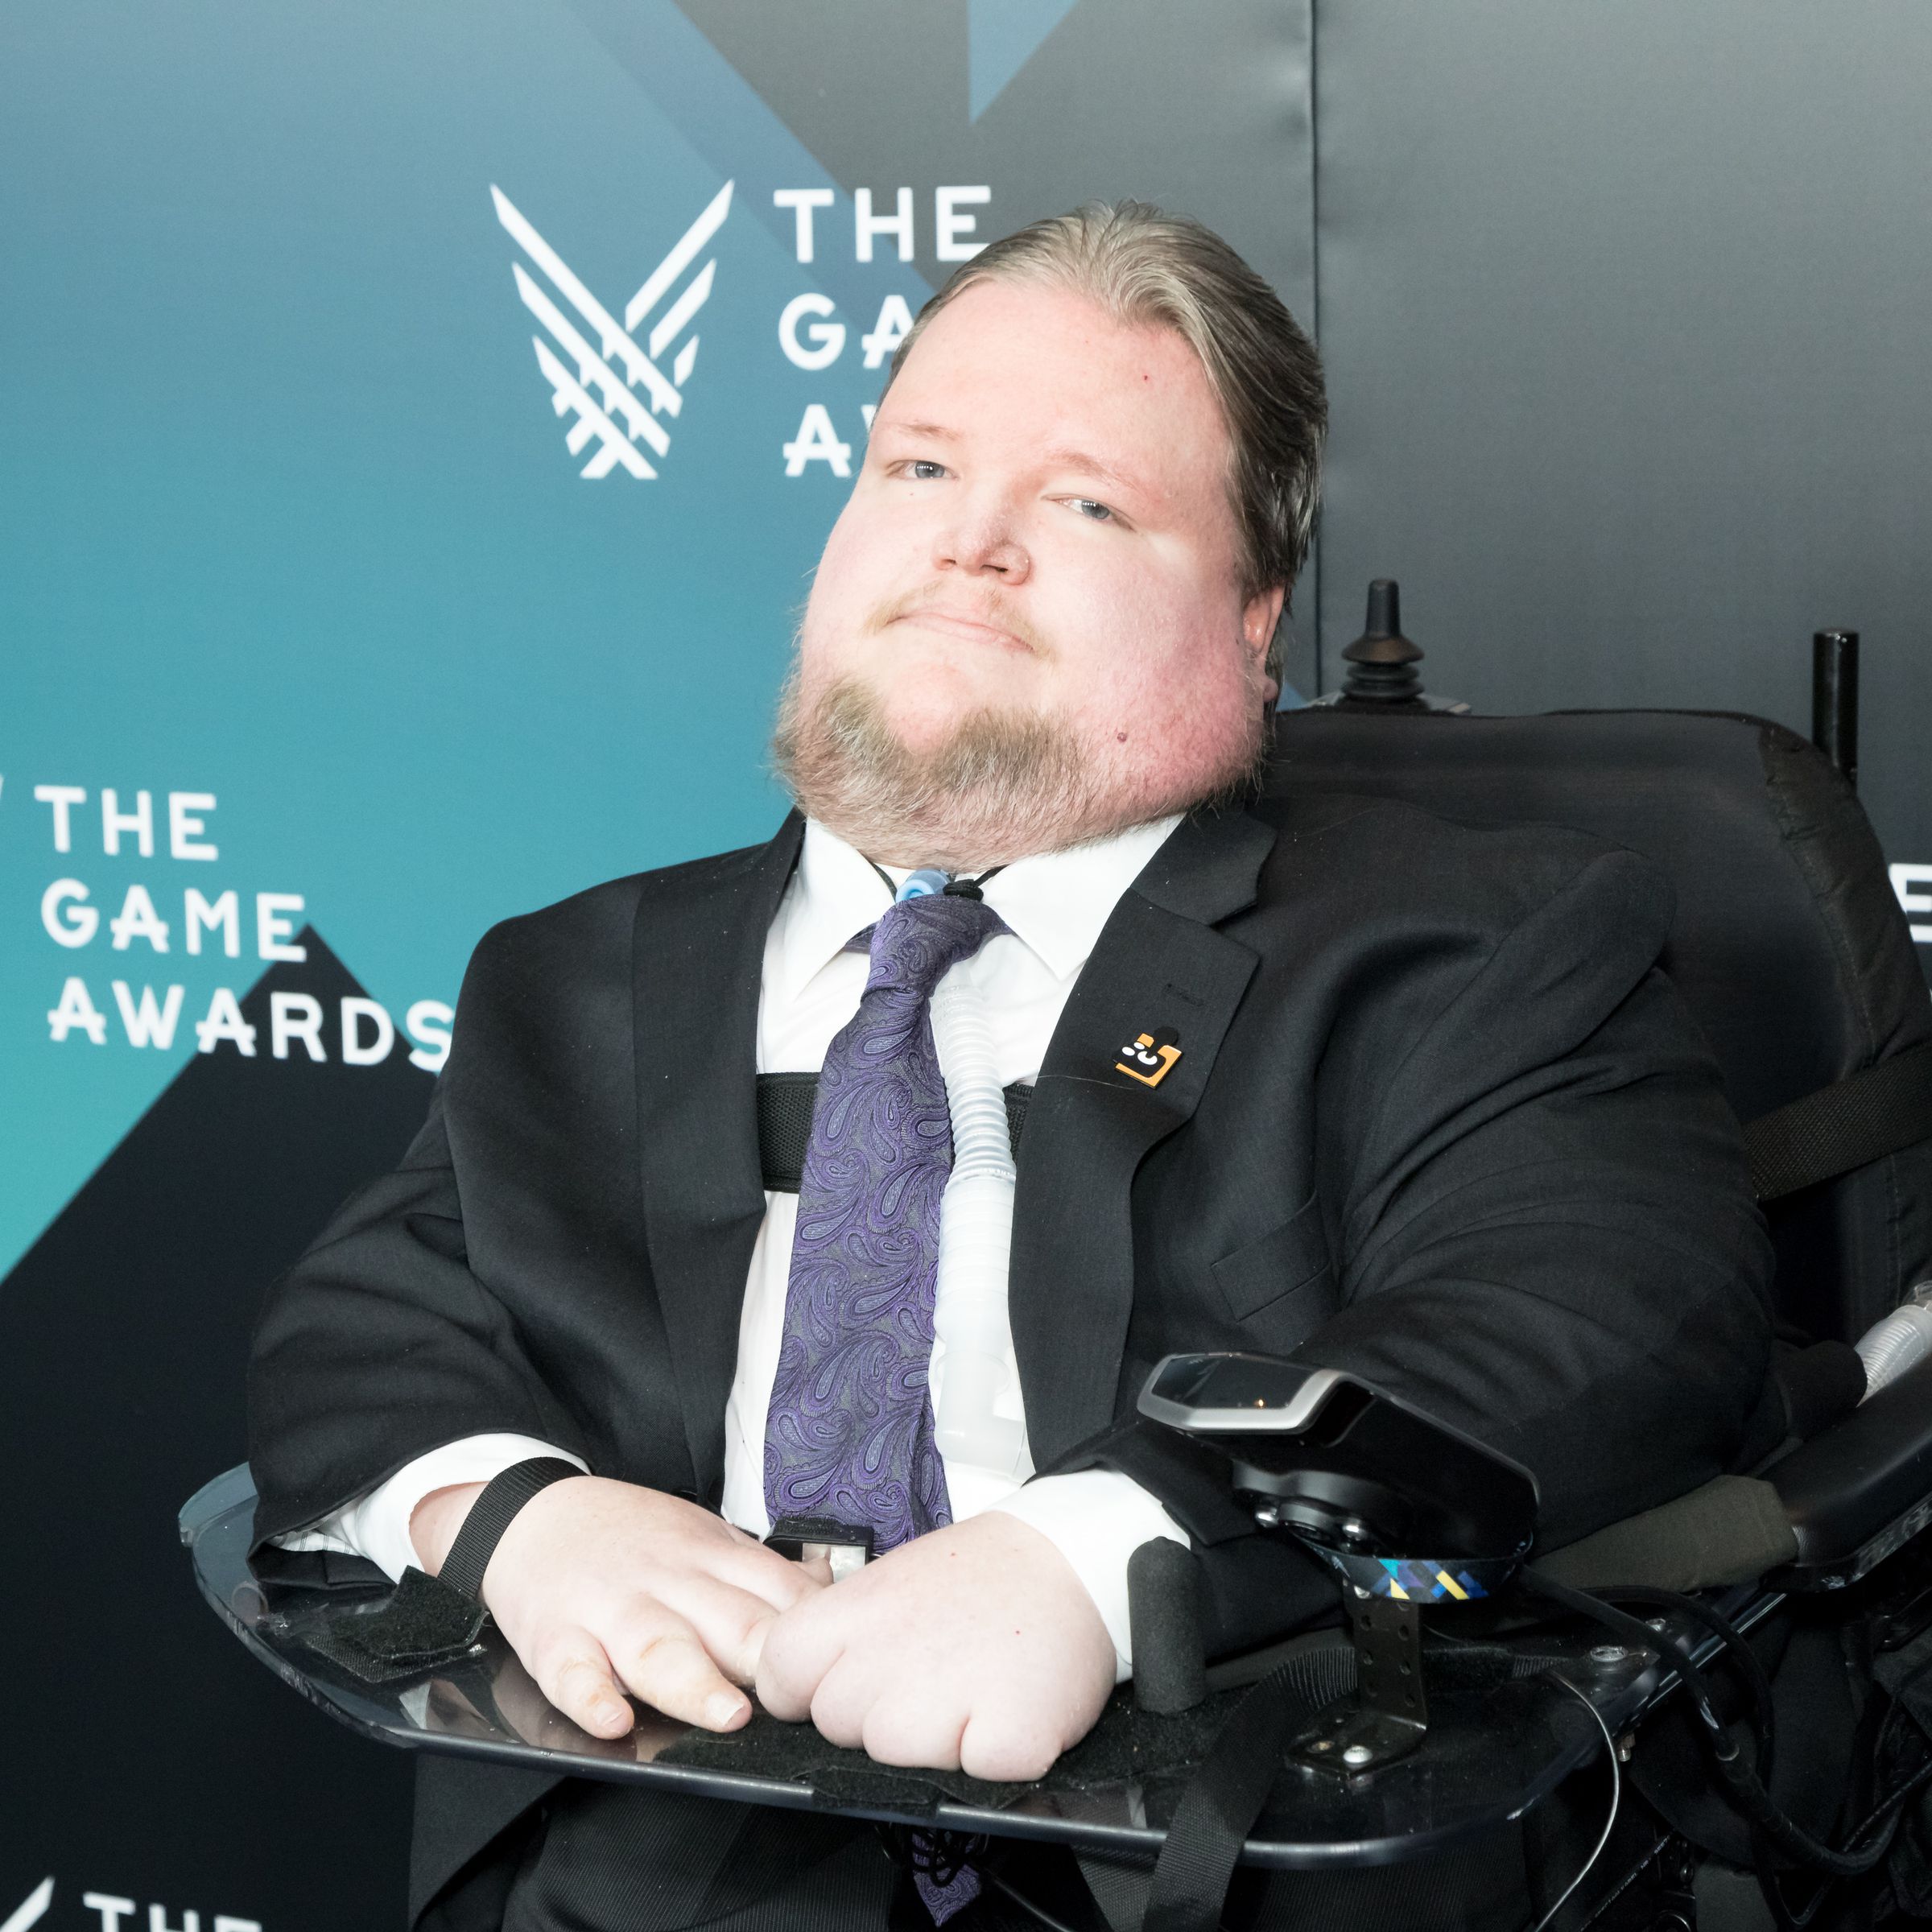 Steven Spohn wearing a suit, sitting in his wheelchair in front of a backdrop with “The Game Awards” on it. 